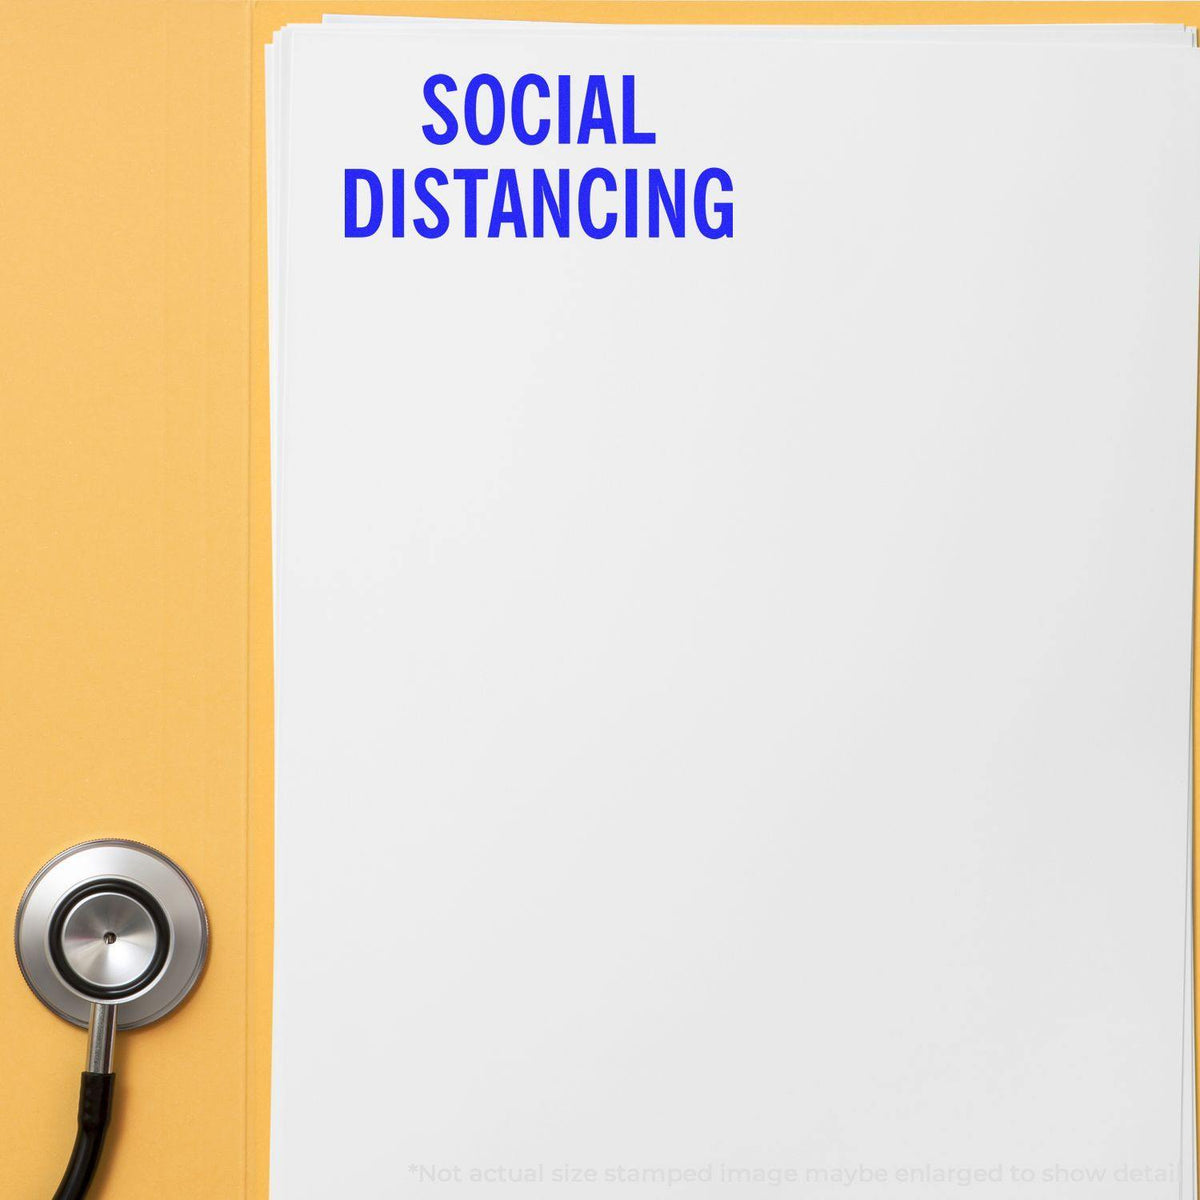 Social Distancing Rubber Stamp In Use Photo